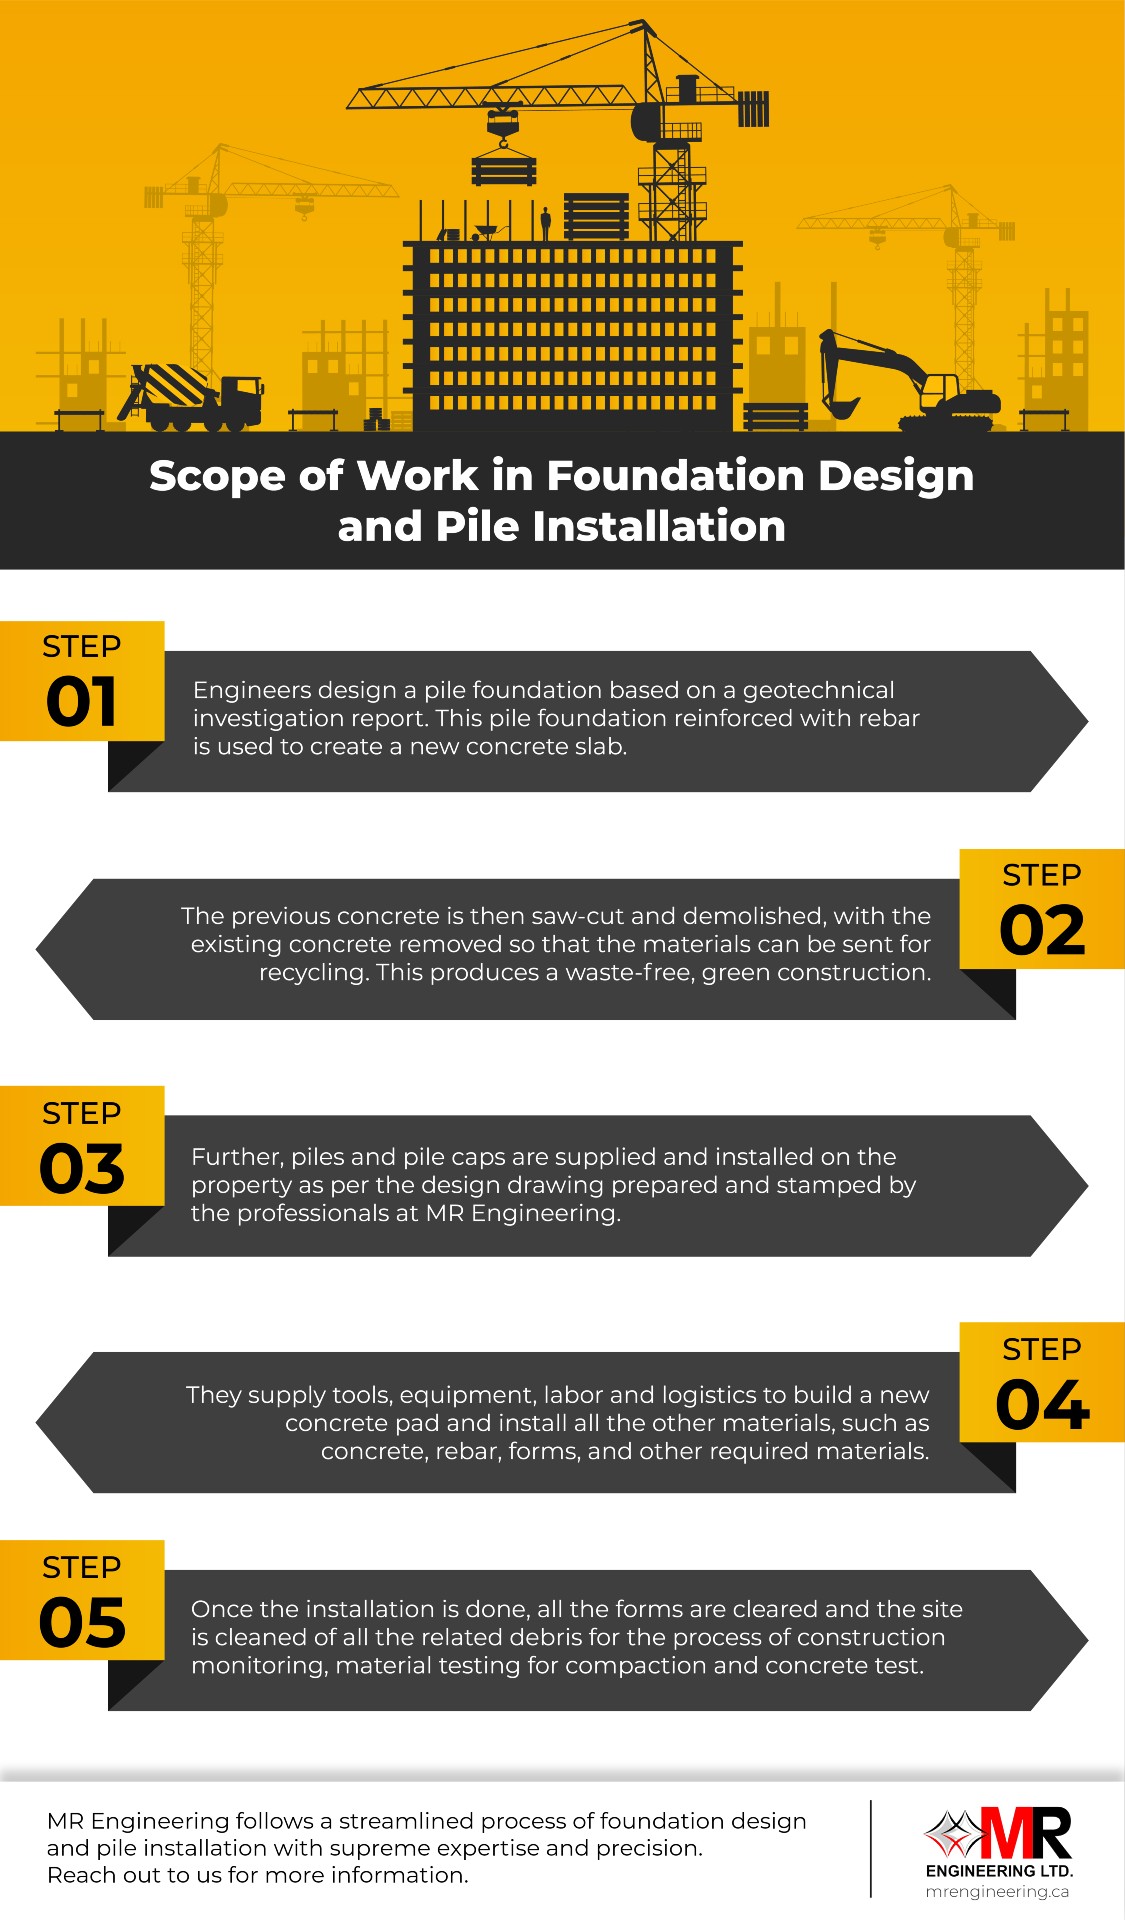 Scope of Work in Foundation Design and Pile Installation